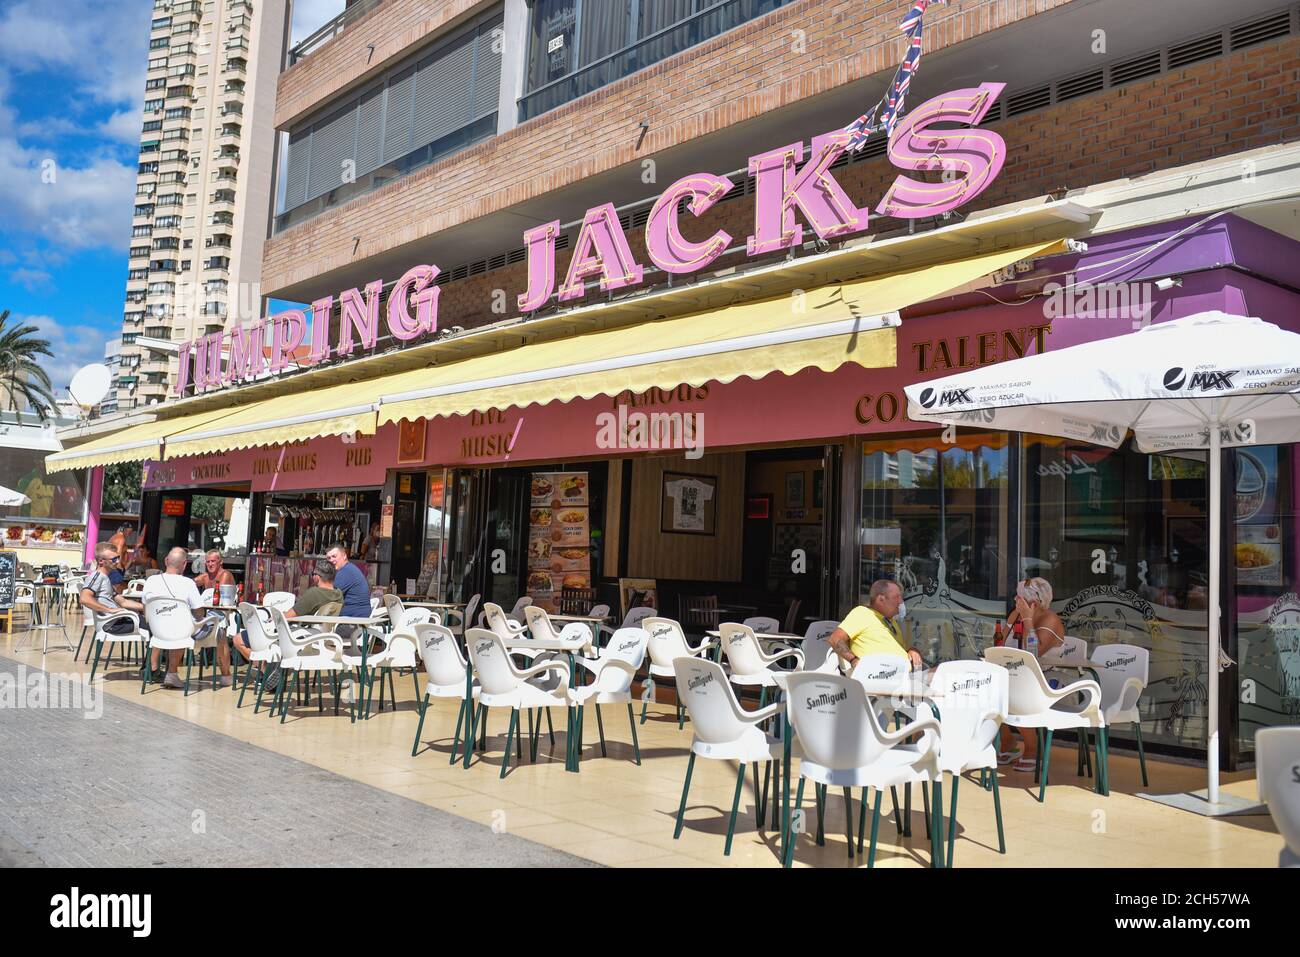 Benidorm, Spain. 9th Sep, 2020. View of Jumping Jacks Bar with few people amid Coronavirus (COVID-19) crisis.When Spain locked down to slow the coronavirus in March, about 25,000 British tourists were enjoying the beaches and bars of the Costa Blanca resort of Benidorm. Local officials quickly ordered hotels to shut their doors, and as the visitors packed their bags and flocked to the airport, the town's tourism industry''”its lifeblood''”went into hibernation along with the rest of the country. Credit: Juan Zamora/SOPA Images/ZUMA Wire/Alamy Live News Stock Photo